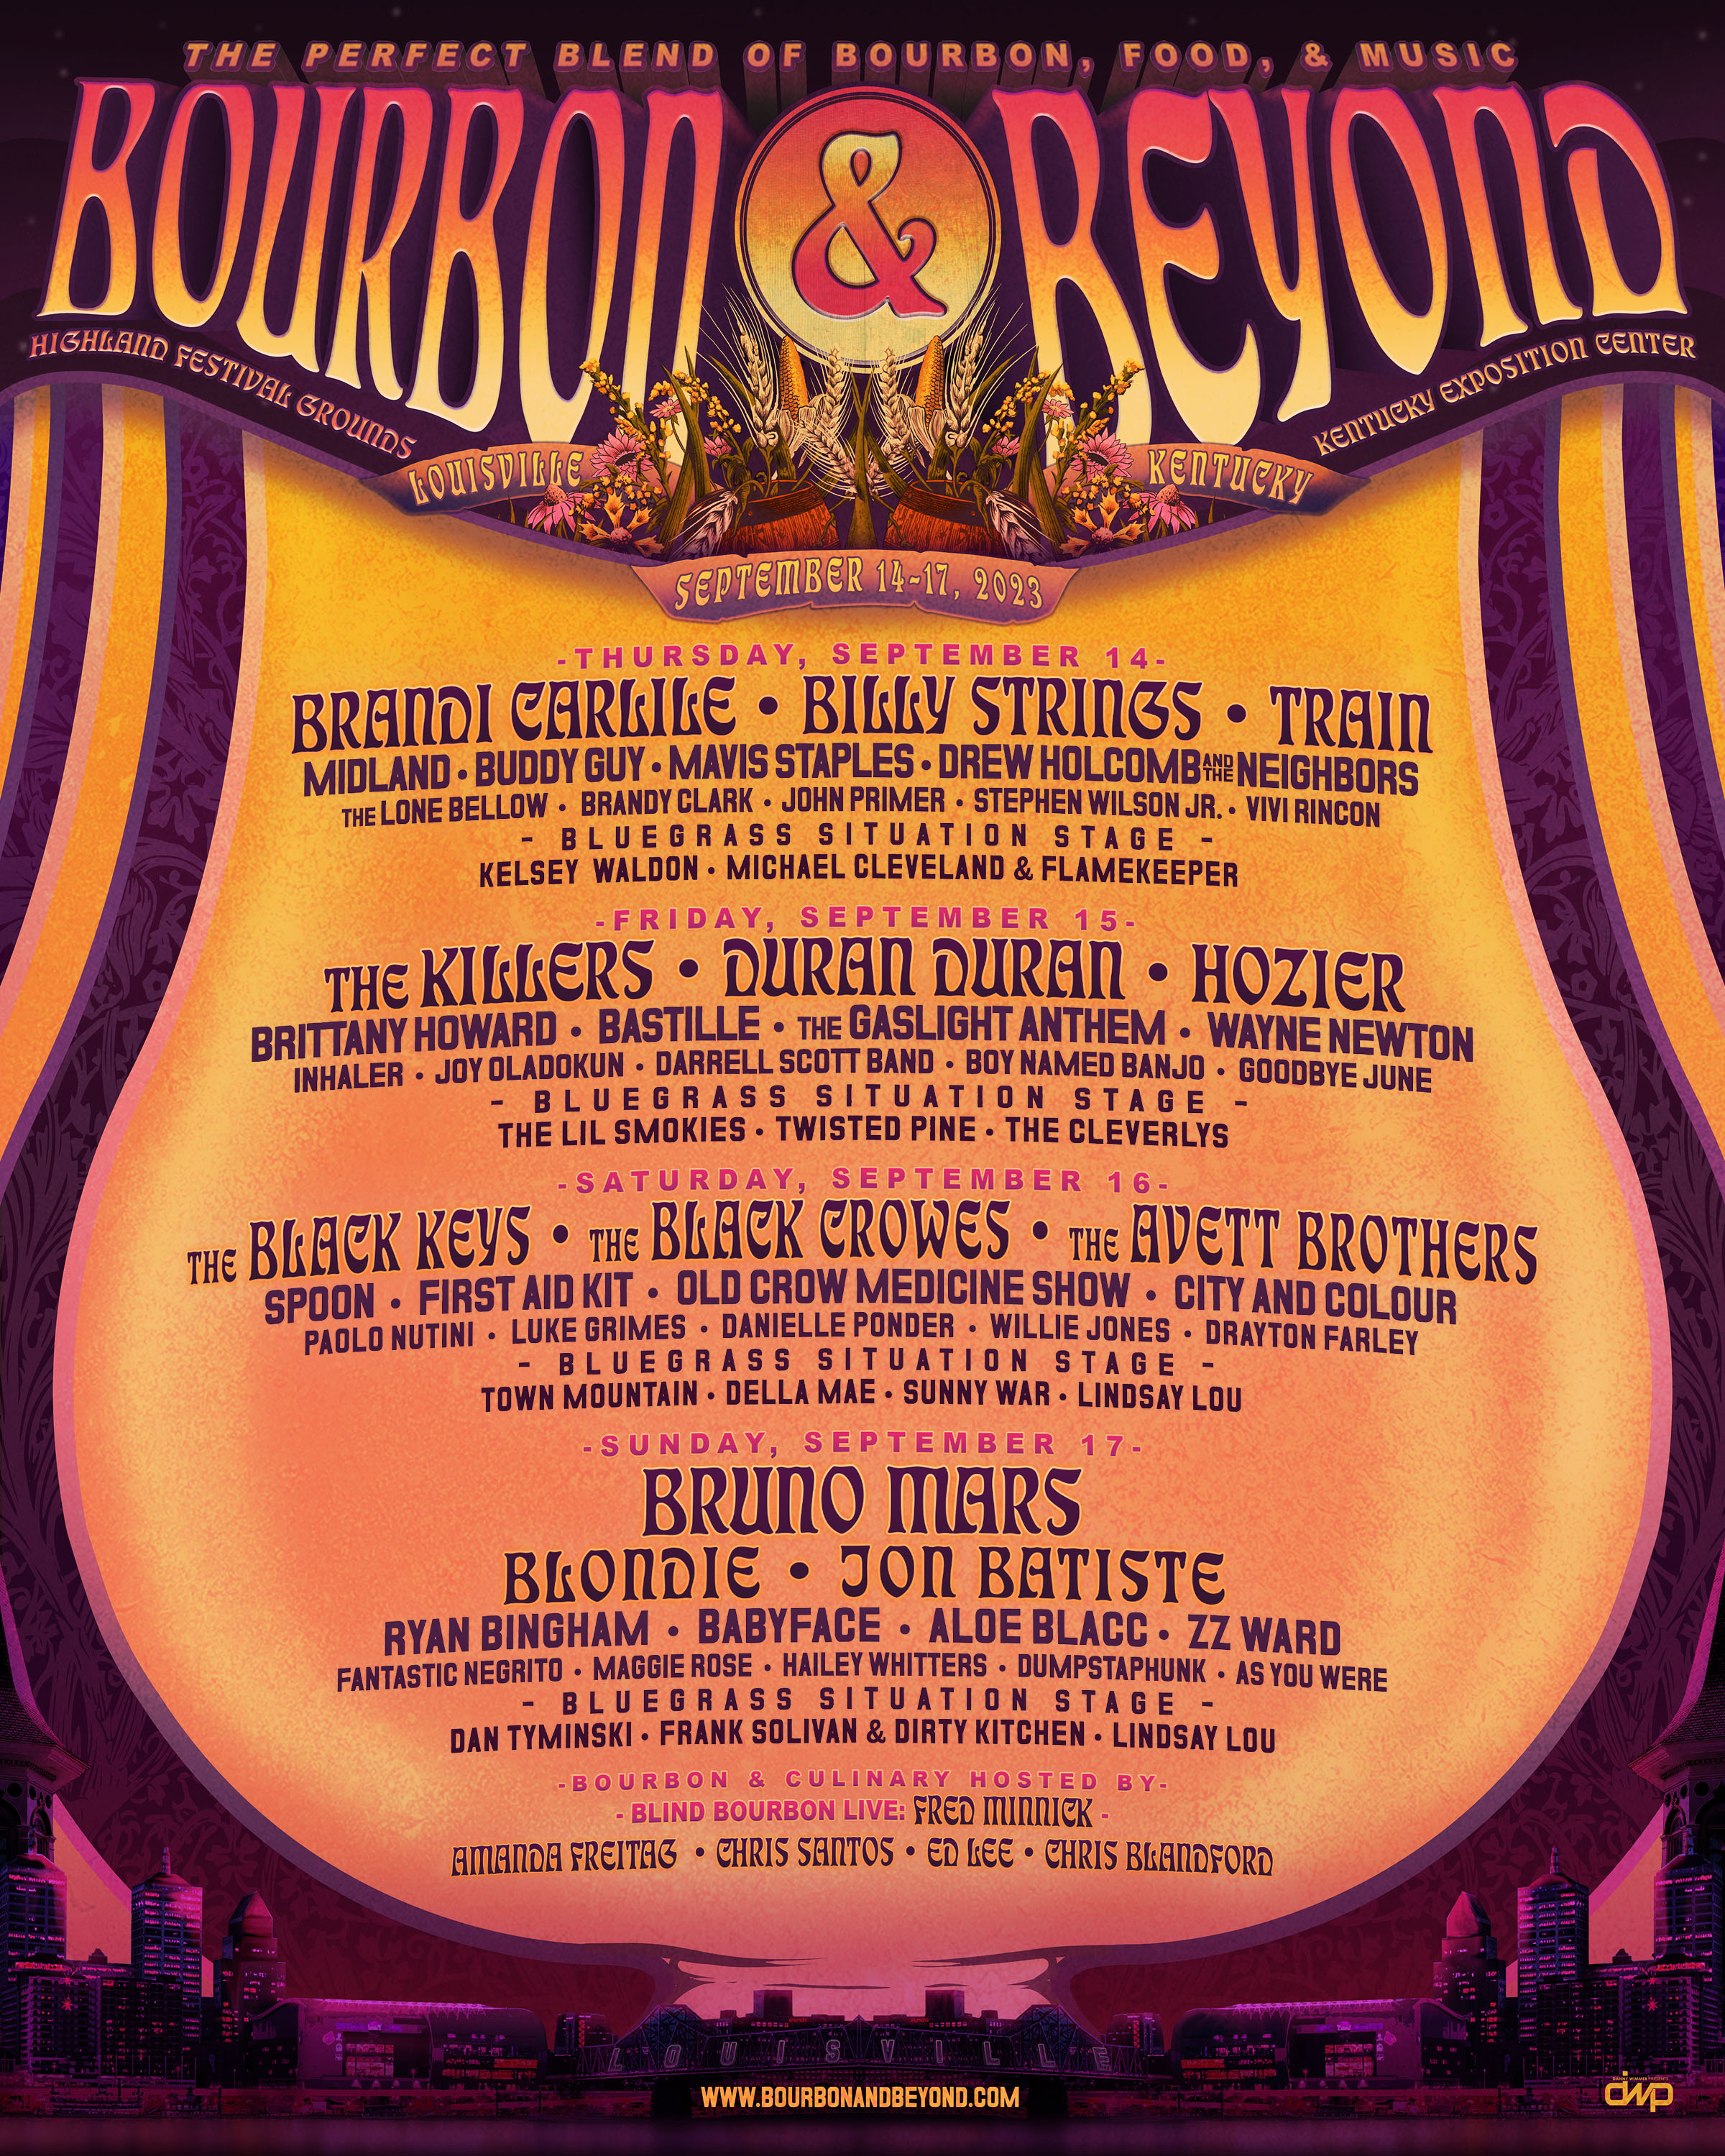 Bourbon & Beyond Jam Packed Line Up Features Bruno Mars